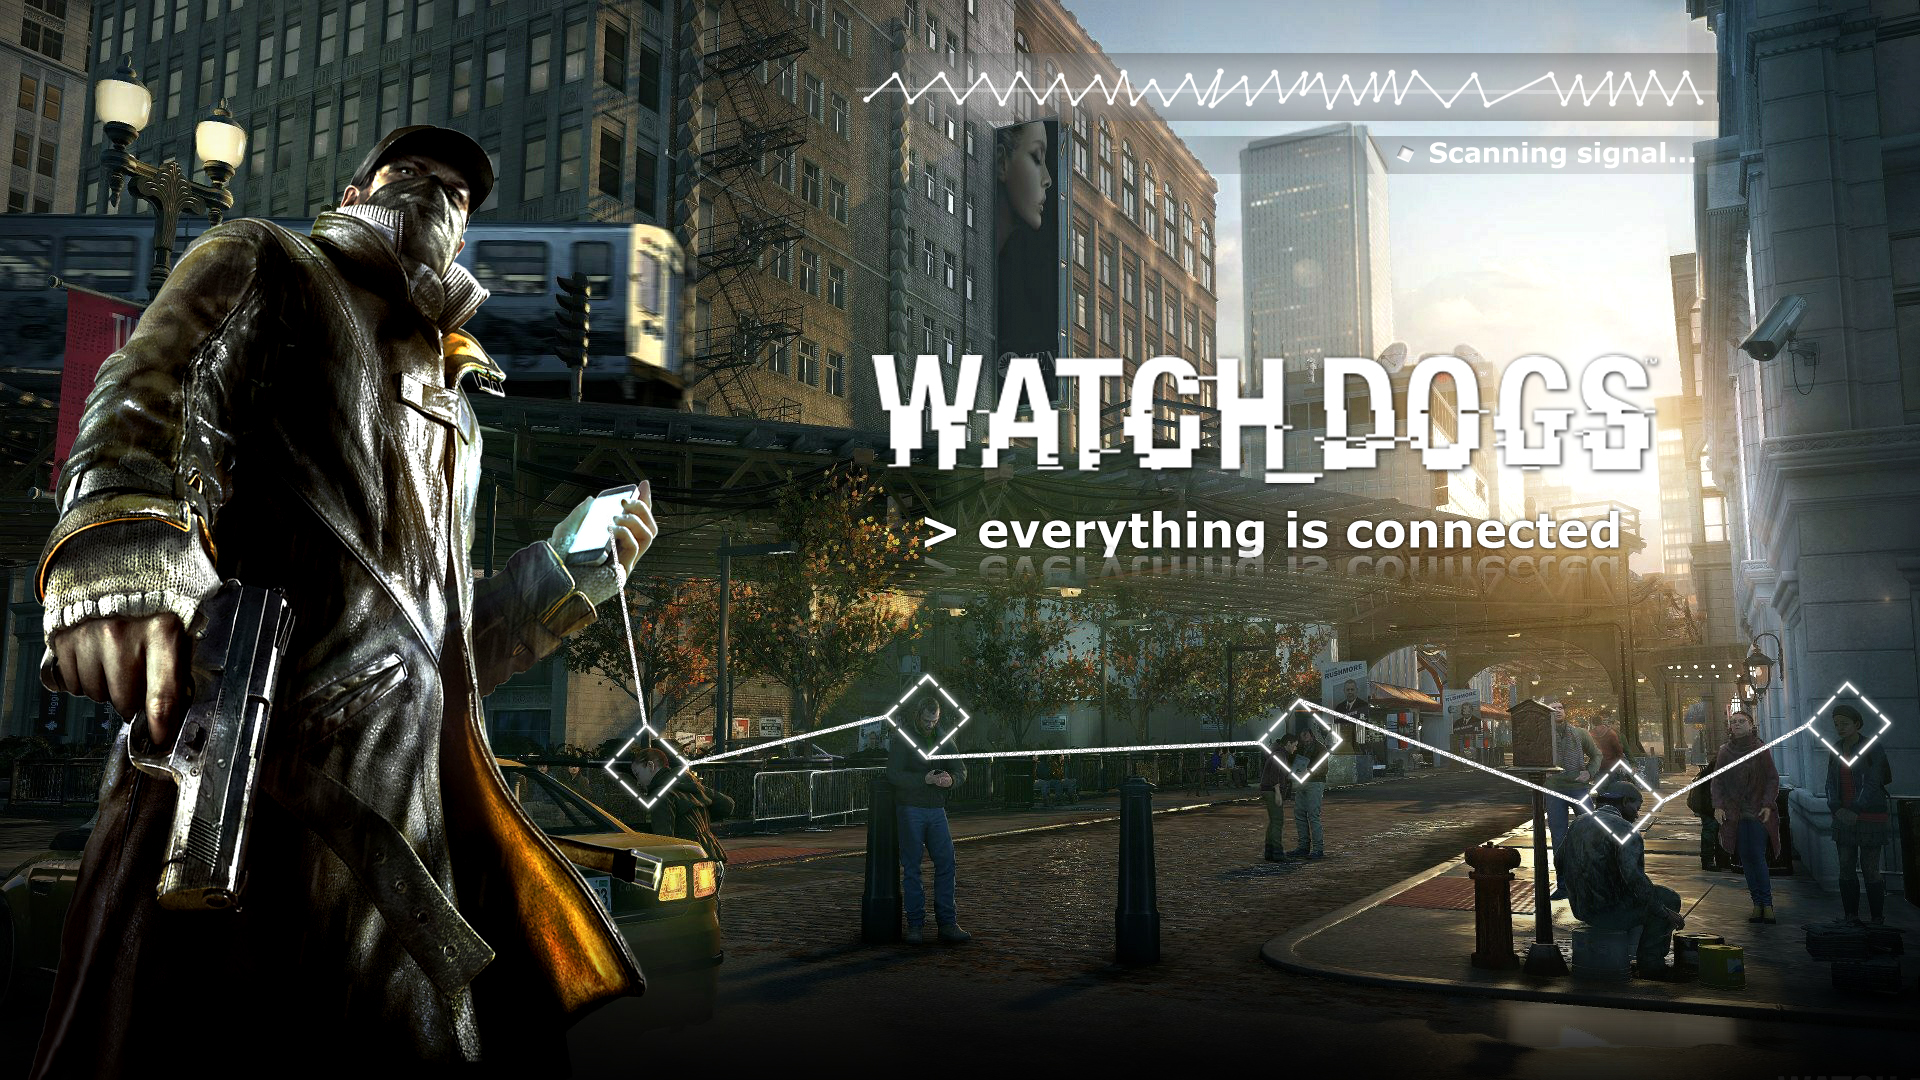 WATCH DOGS Quiz (25 trivia questions & answers)